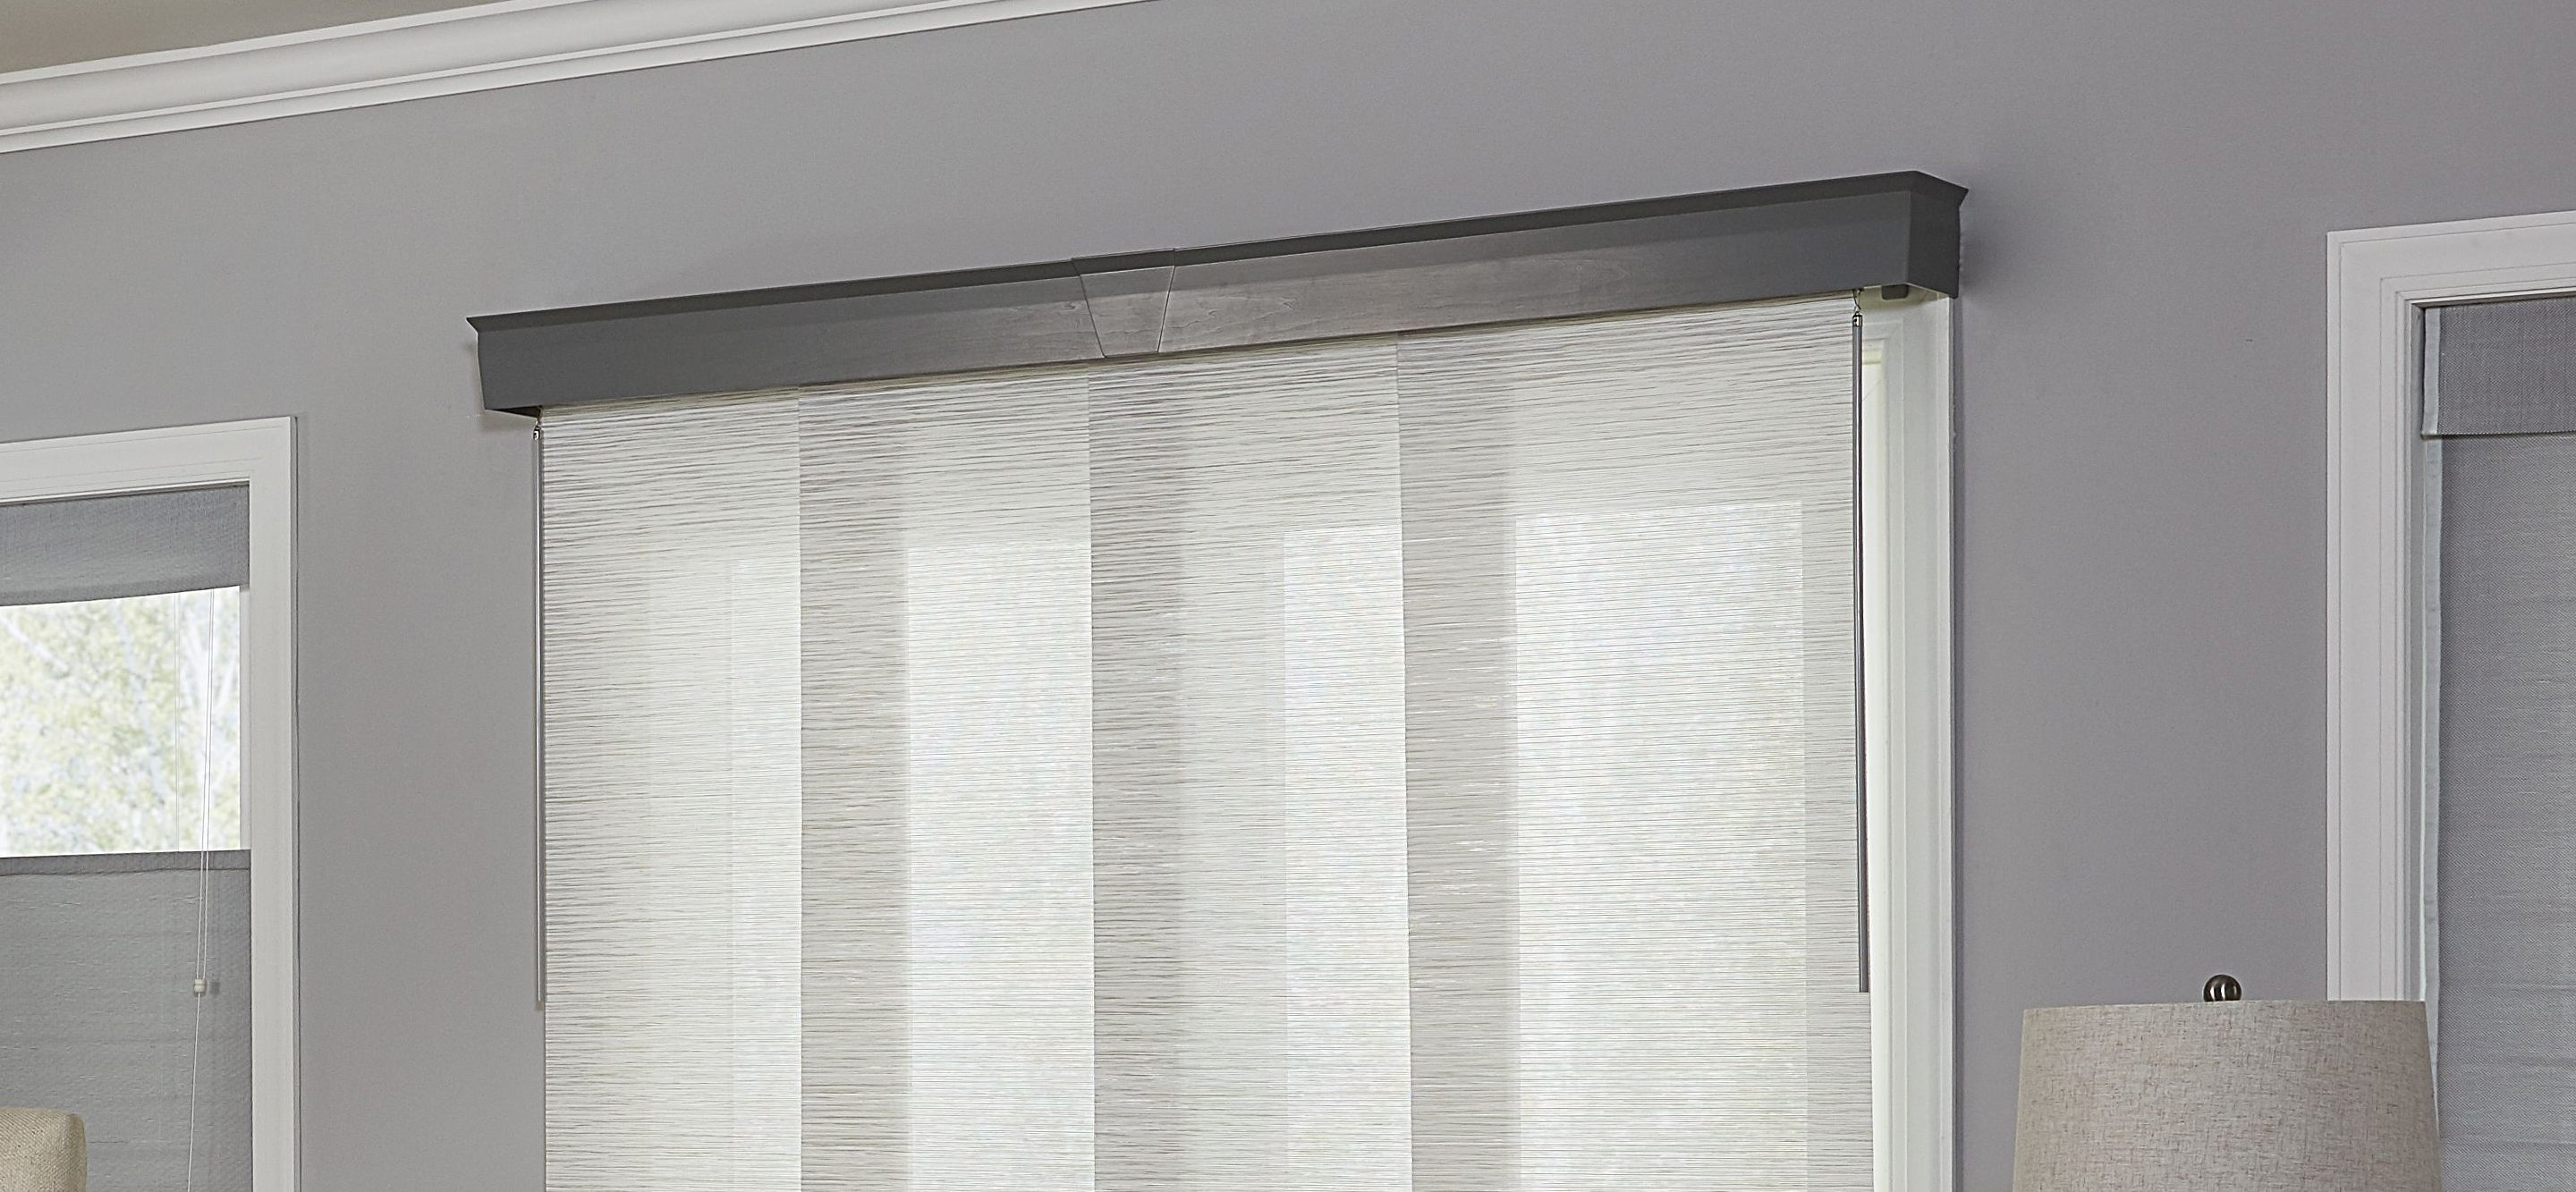 The Best Vertical Blinds Alternatives For Sliding Glass Doors within size 2880 X 1333